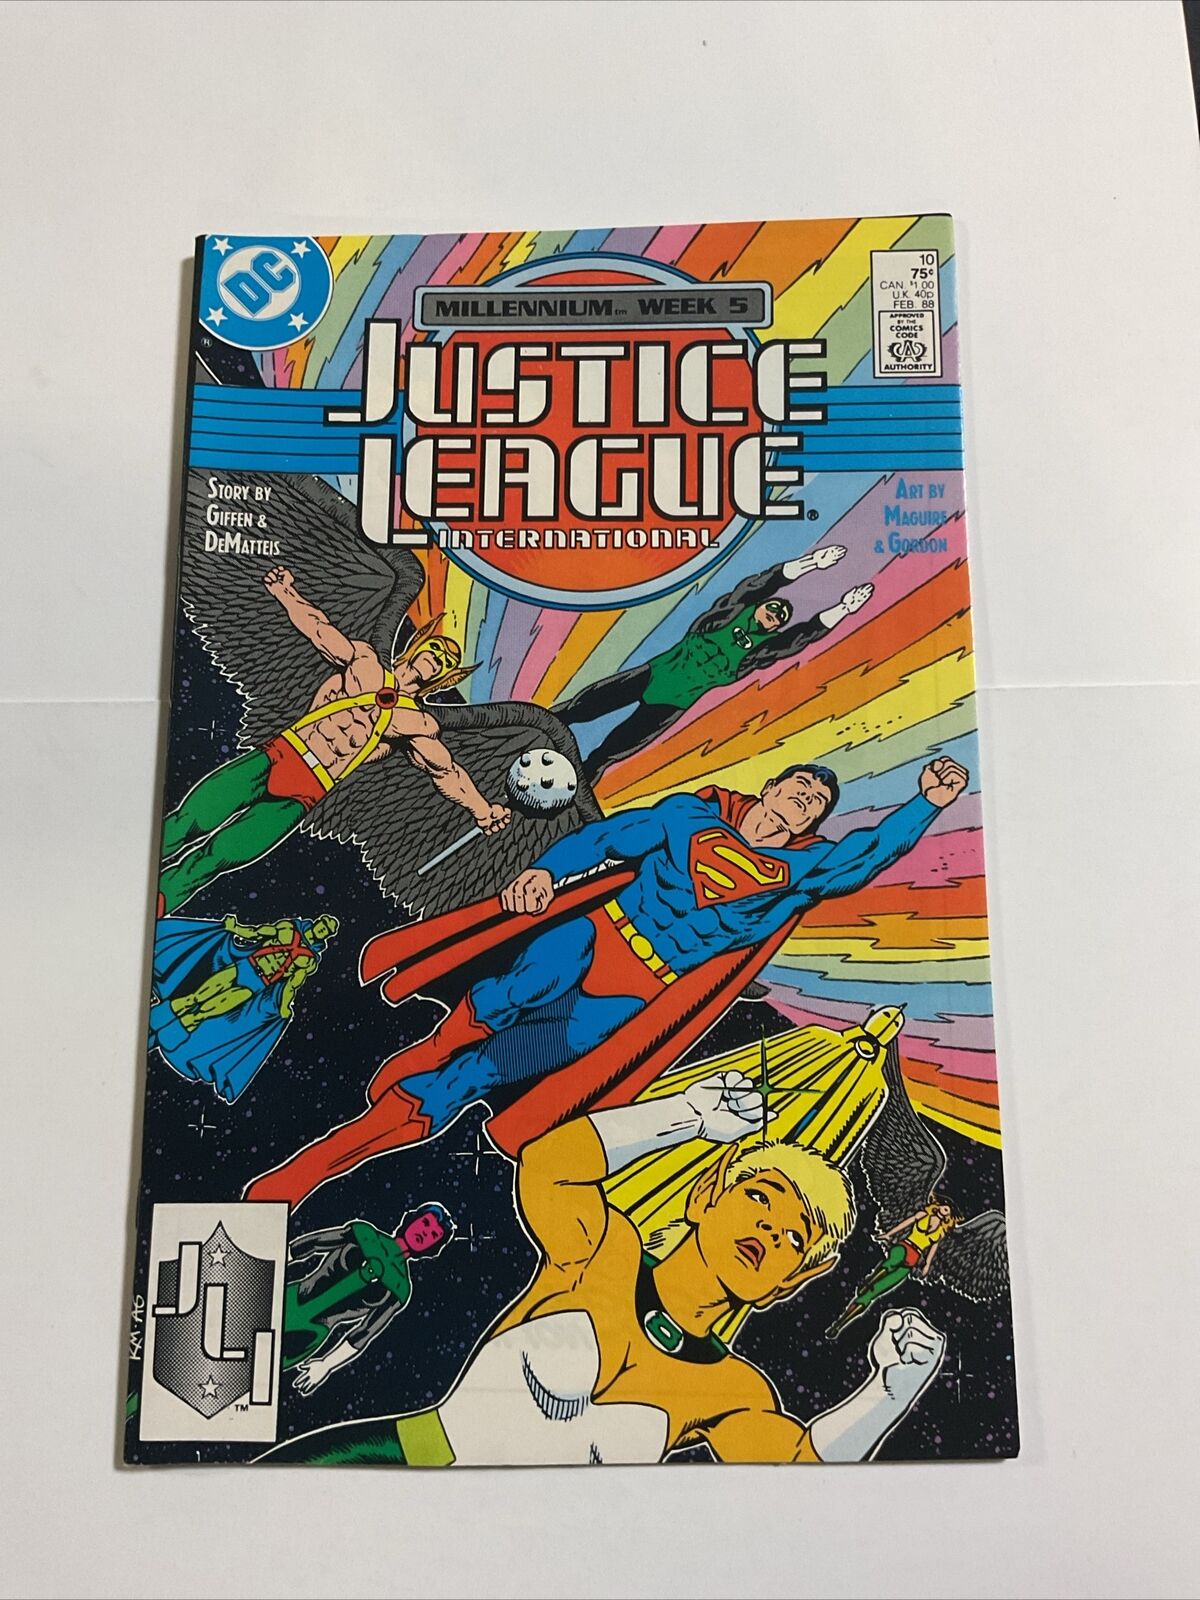 Vintage Justice League #10 VF-NM DC Comics 1988 HIGH GRADE Combined Shipping